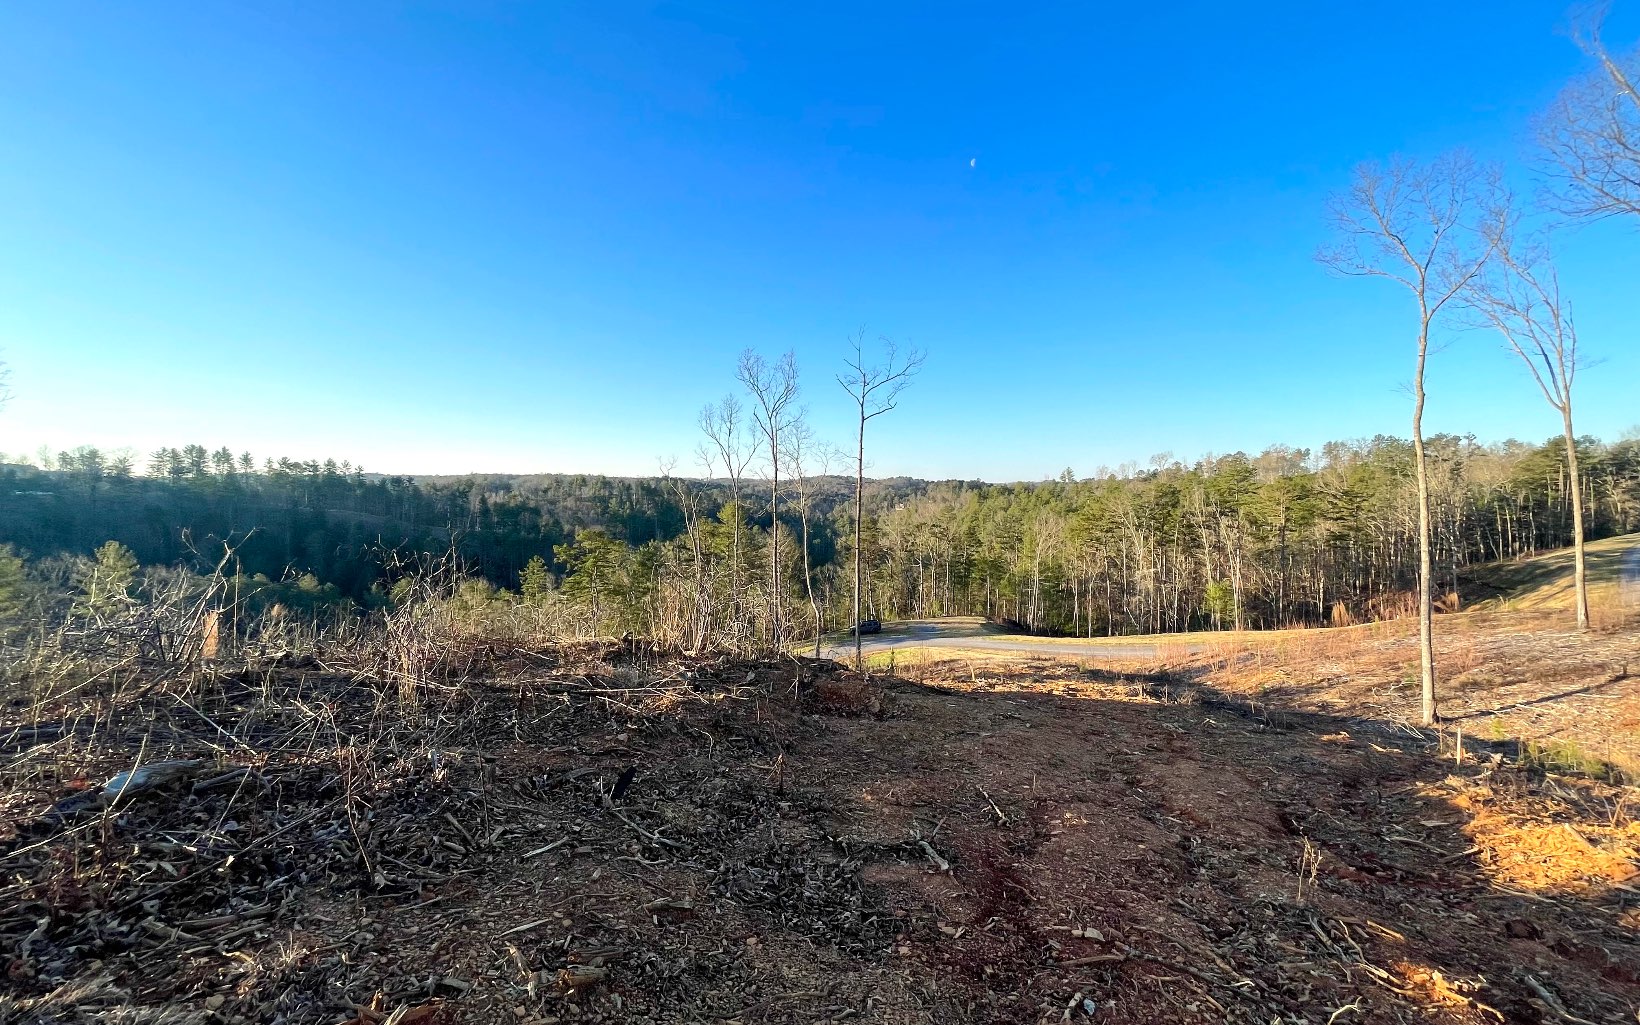 This 3.12 acre lot boasts almost 100ft of Mountaintown Creek frontage with ridgeline mountain views and partially cleared! This is great opportunity to own a lot and build your dream mountain home in the highly sought after High River subdivision in Ellijay, Ga! A stunning newly developed subdivision that offers breathtaking views with creek and lake access! Located only minutes to downtown Ellijay, dining/shopping, wineries, and more!